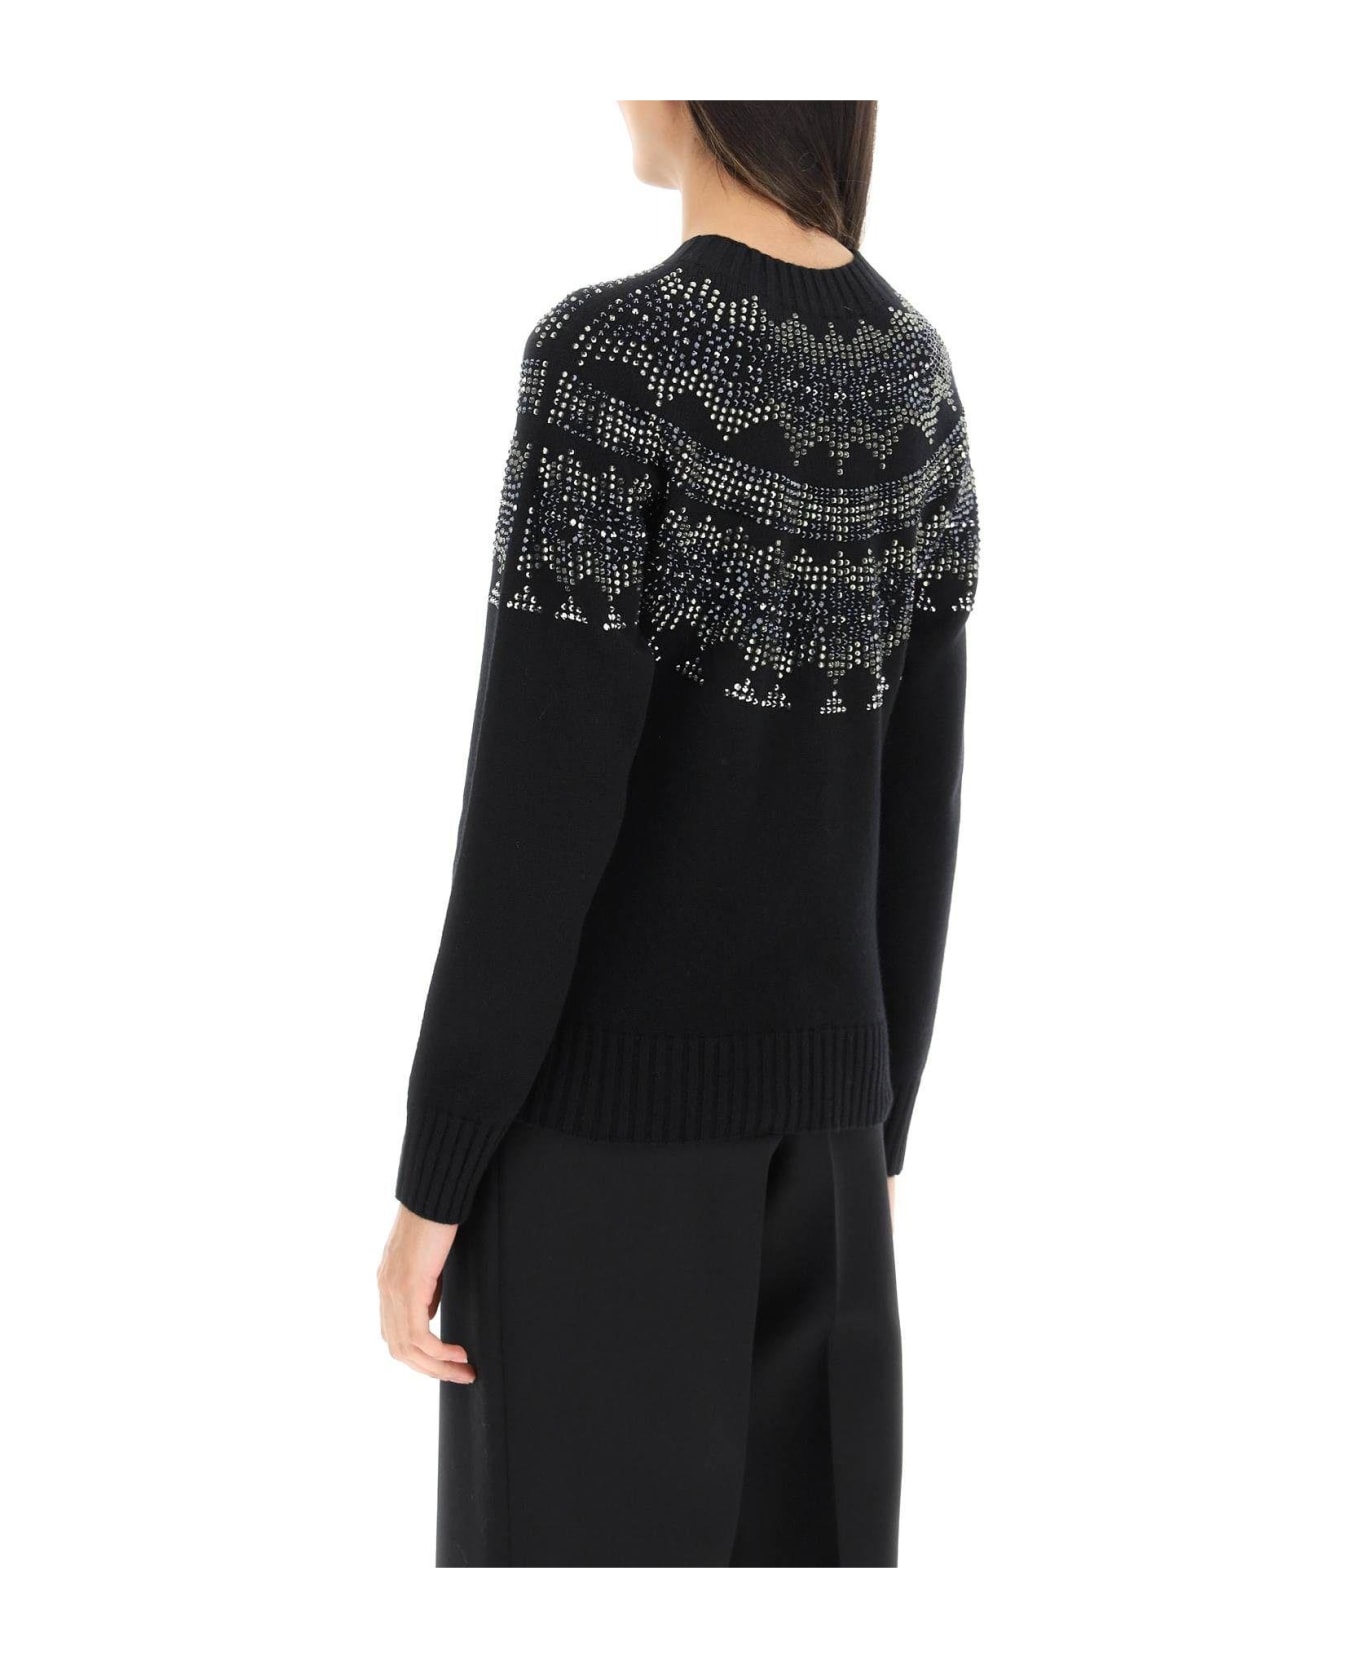 Max Mara 'osmio' Wool And Cashmere Fair-isle Sweater With Crystals - BLACK